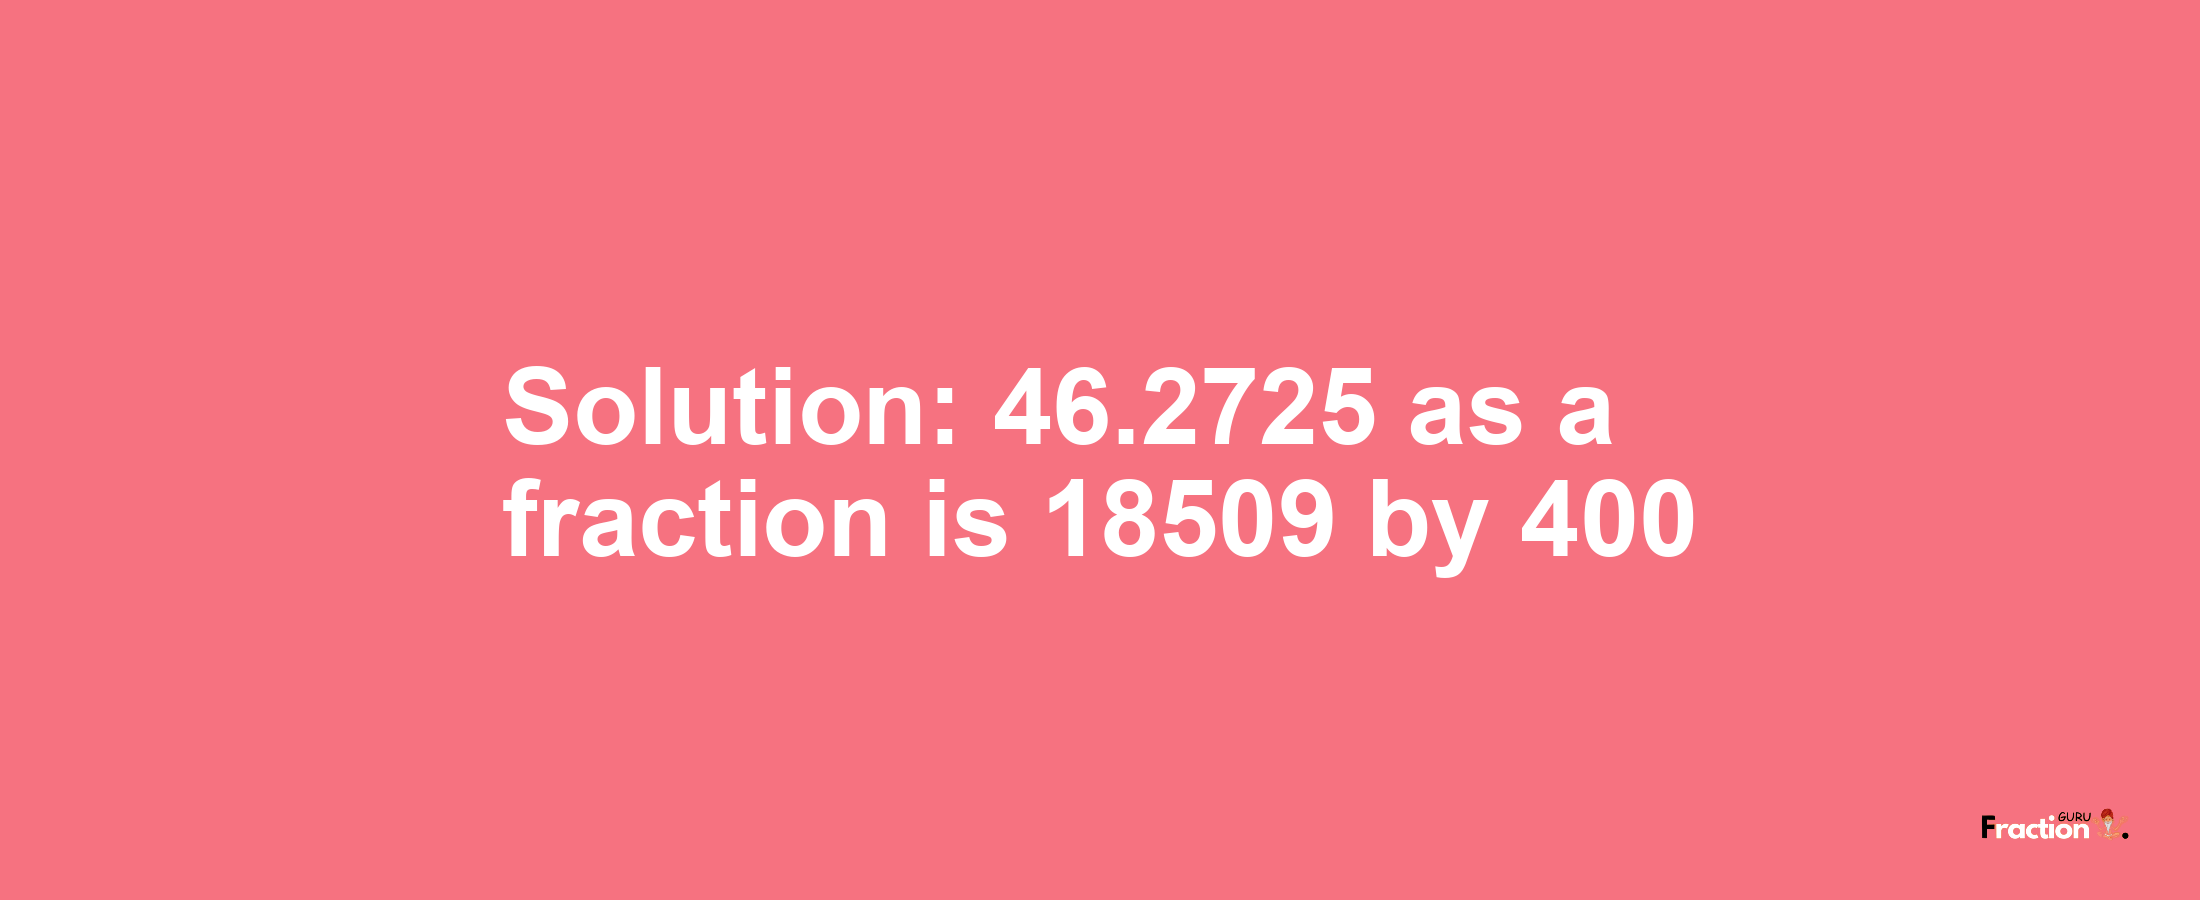 Solution:46.2725 as a fraction is 18509/400